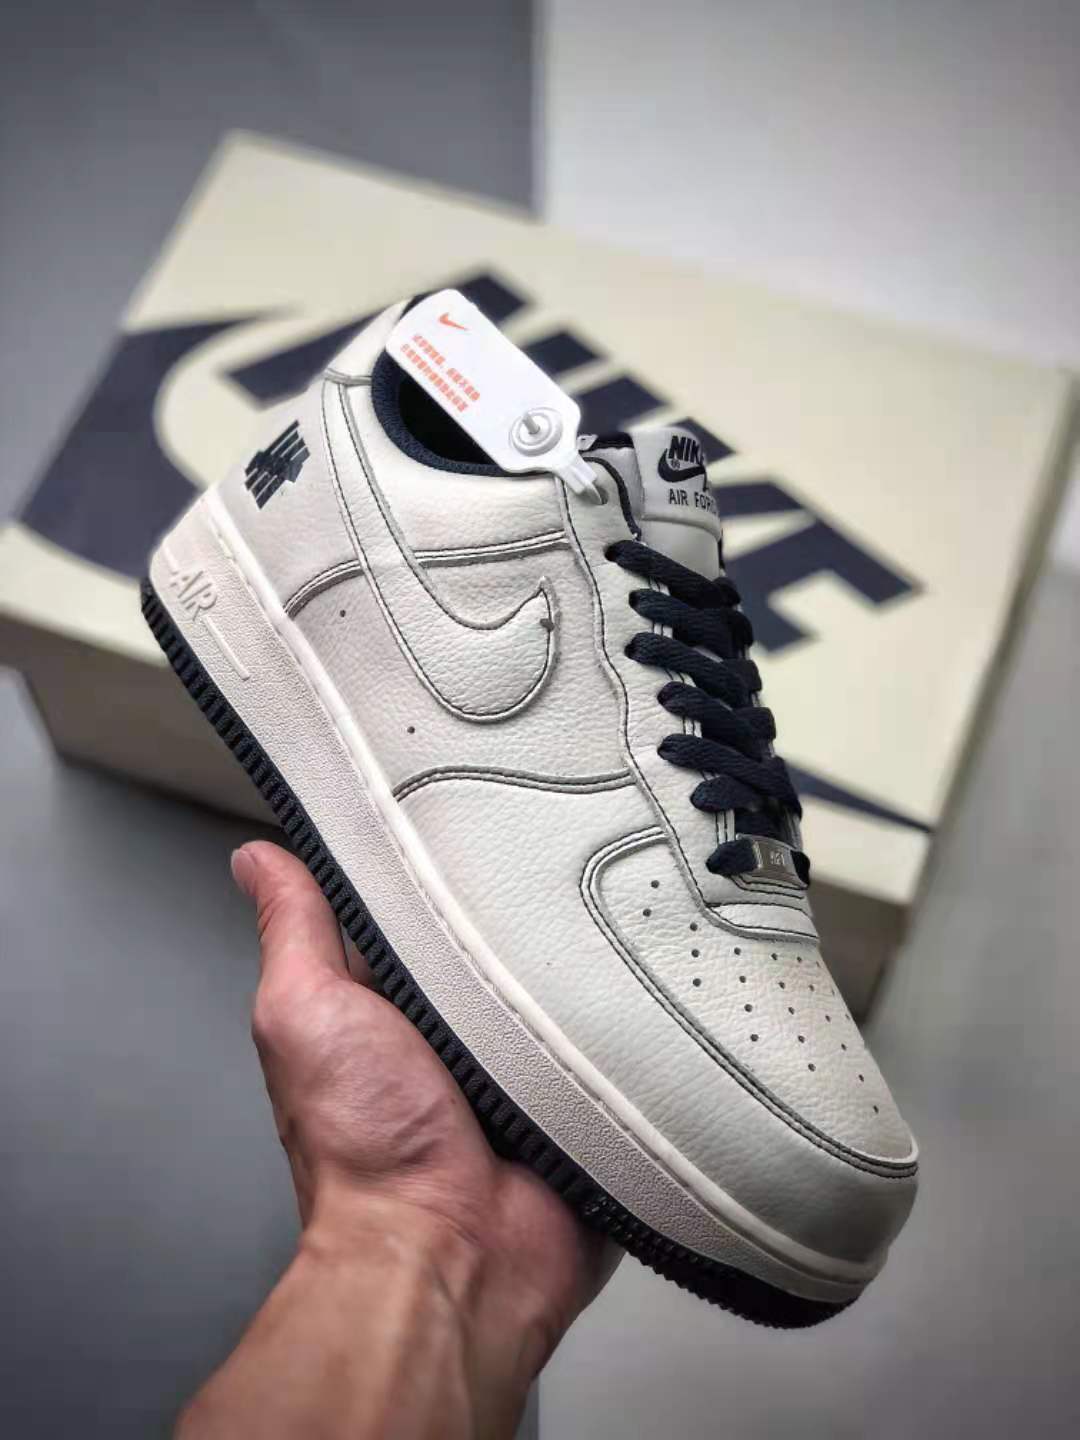 Nike Air Force 1 Low Undefeated Beige Dark Blue UN1315-800 - Premium Sneakers for Style and Performance